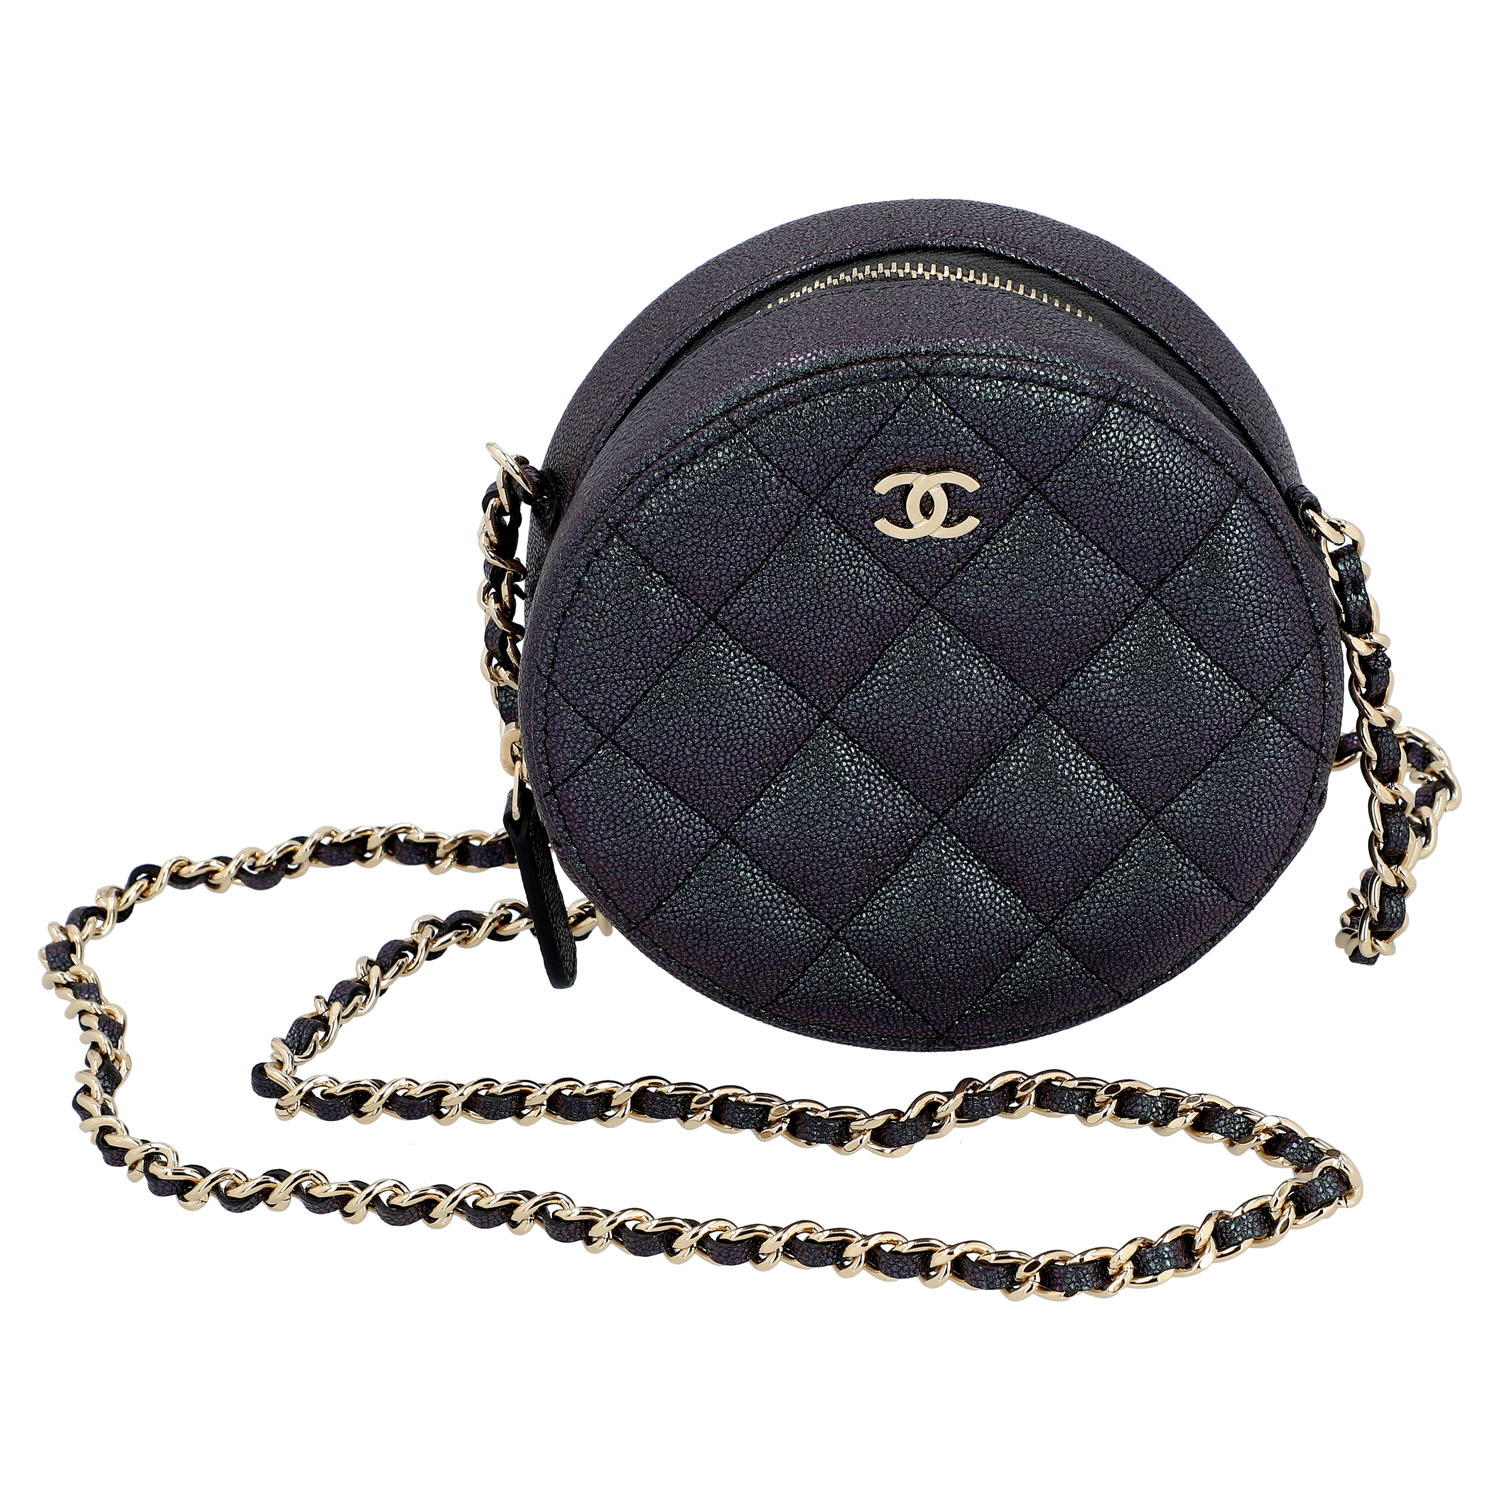 EPPLI | CHANEL shoulder bag 'ROUND AS EARTH'. | purchase online